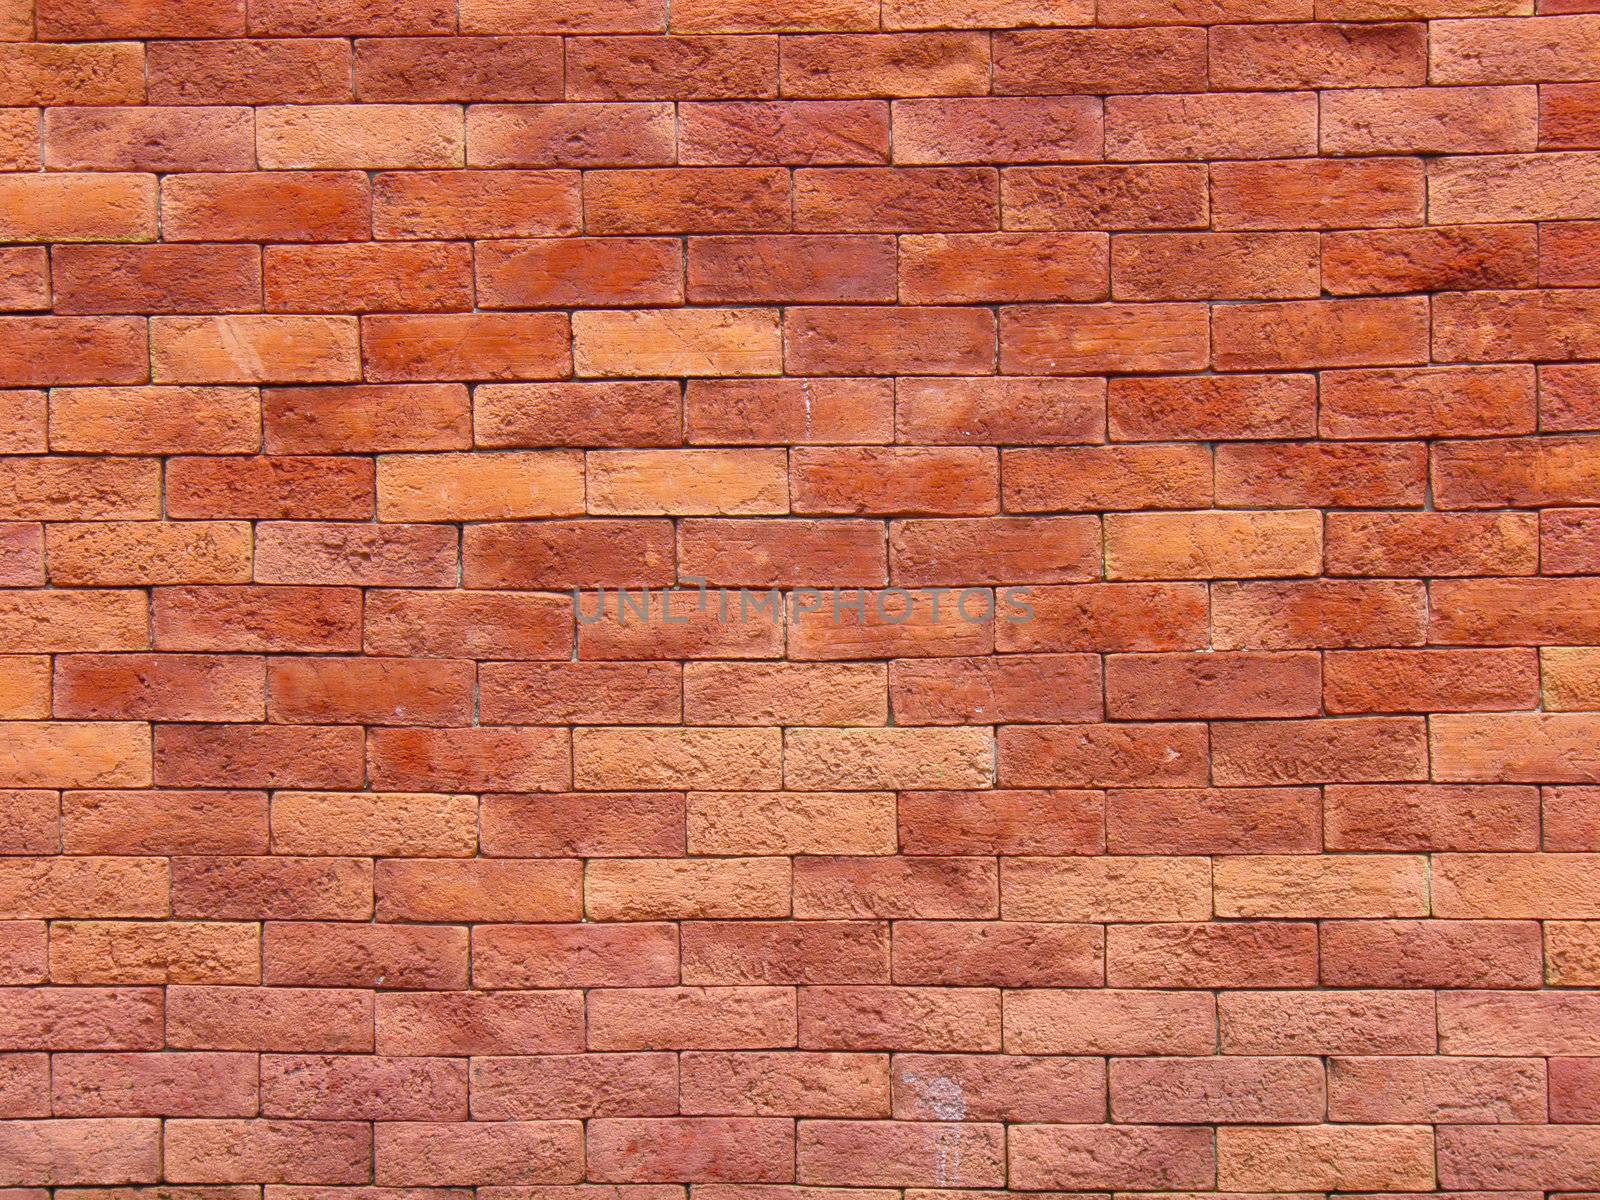 Brick wall from a new house